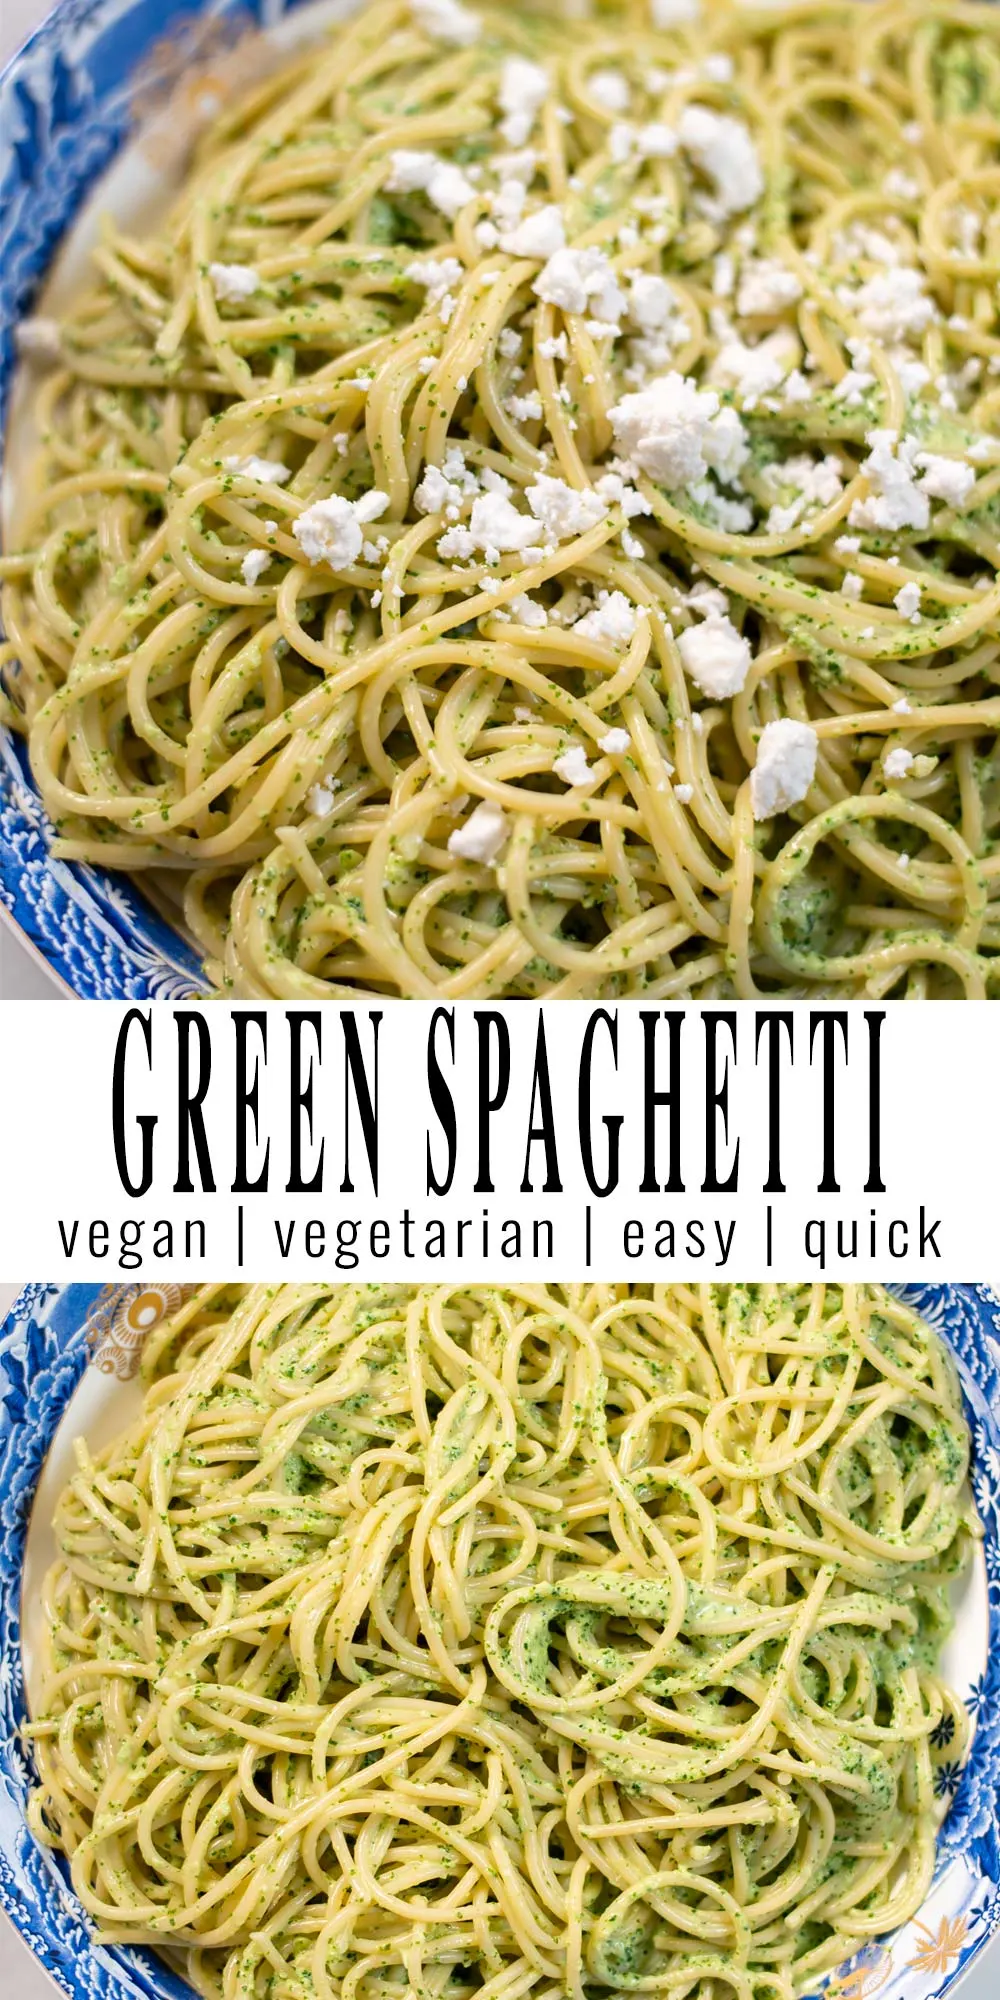 Collage of two photos of Green Spaghetti with recipe title text.